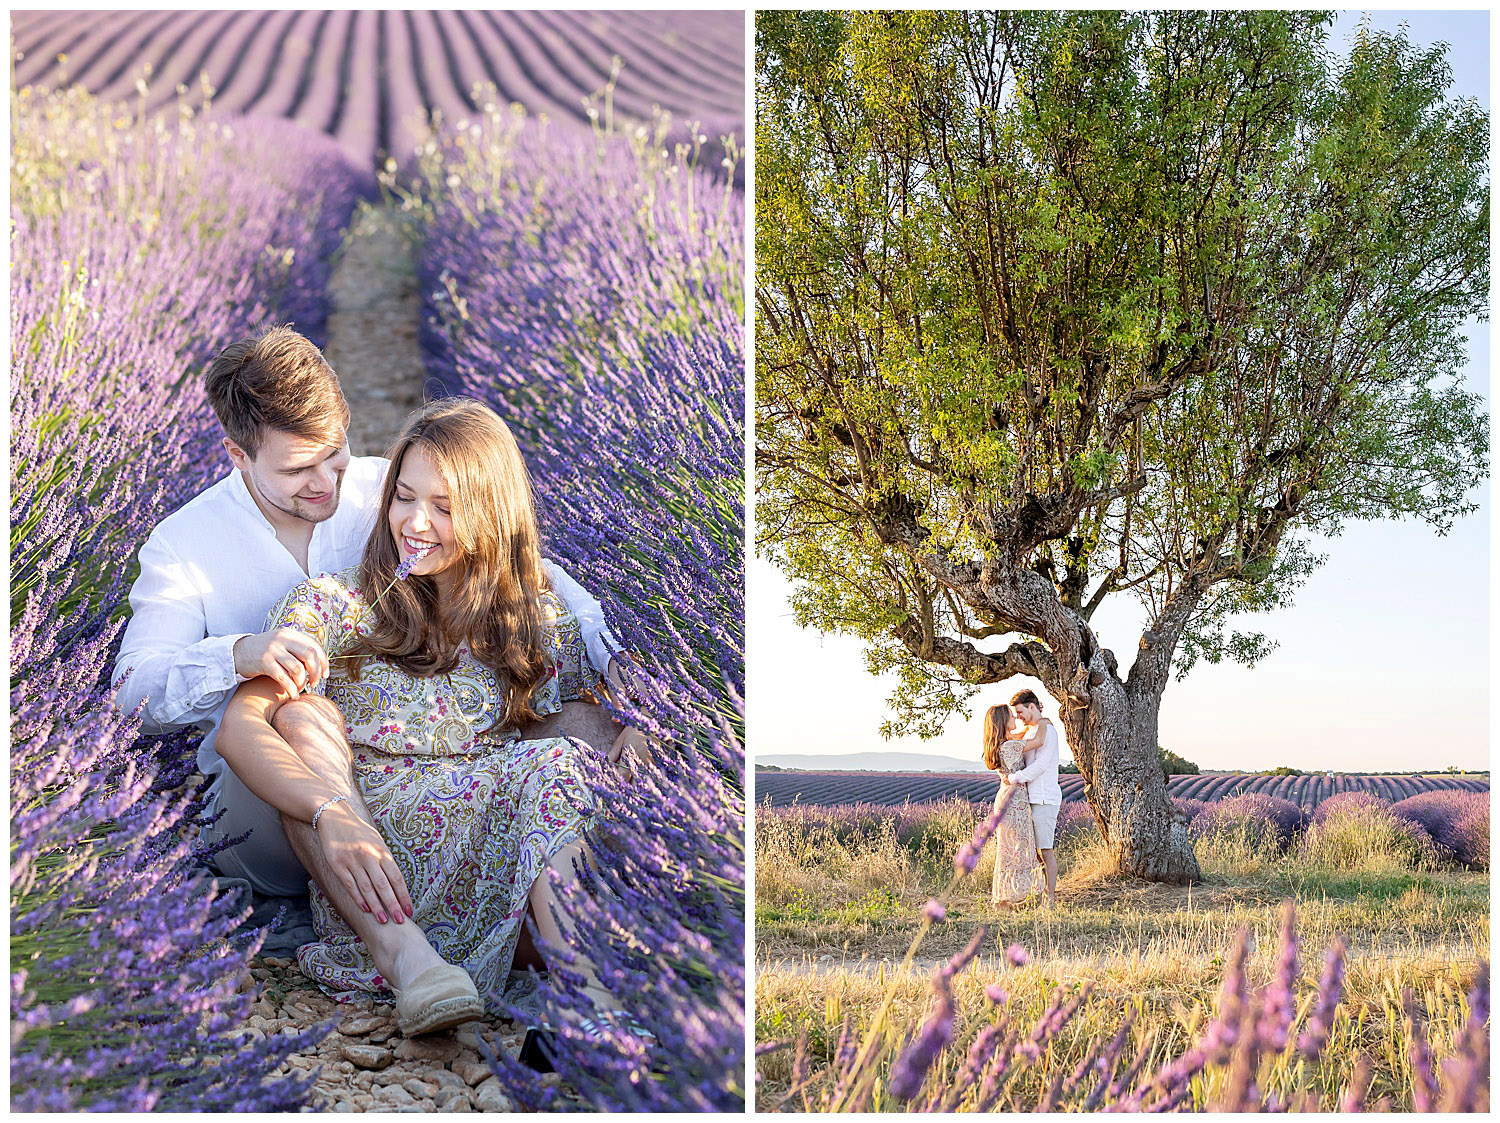 Marie-Calfopoulos-photographer-Provence-Luberon-Sault-Valensole-lavender-fields-photo-session